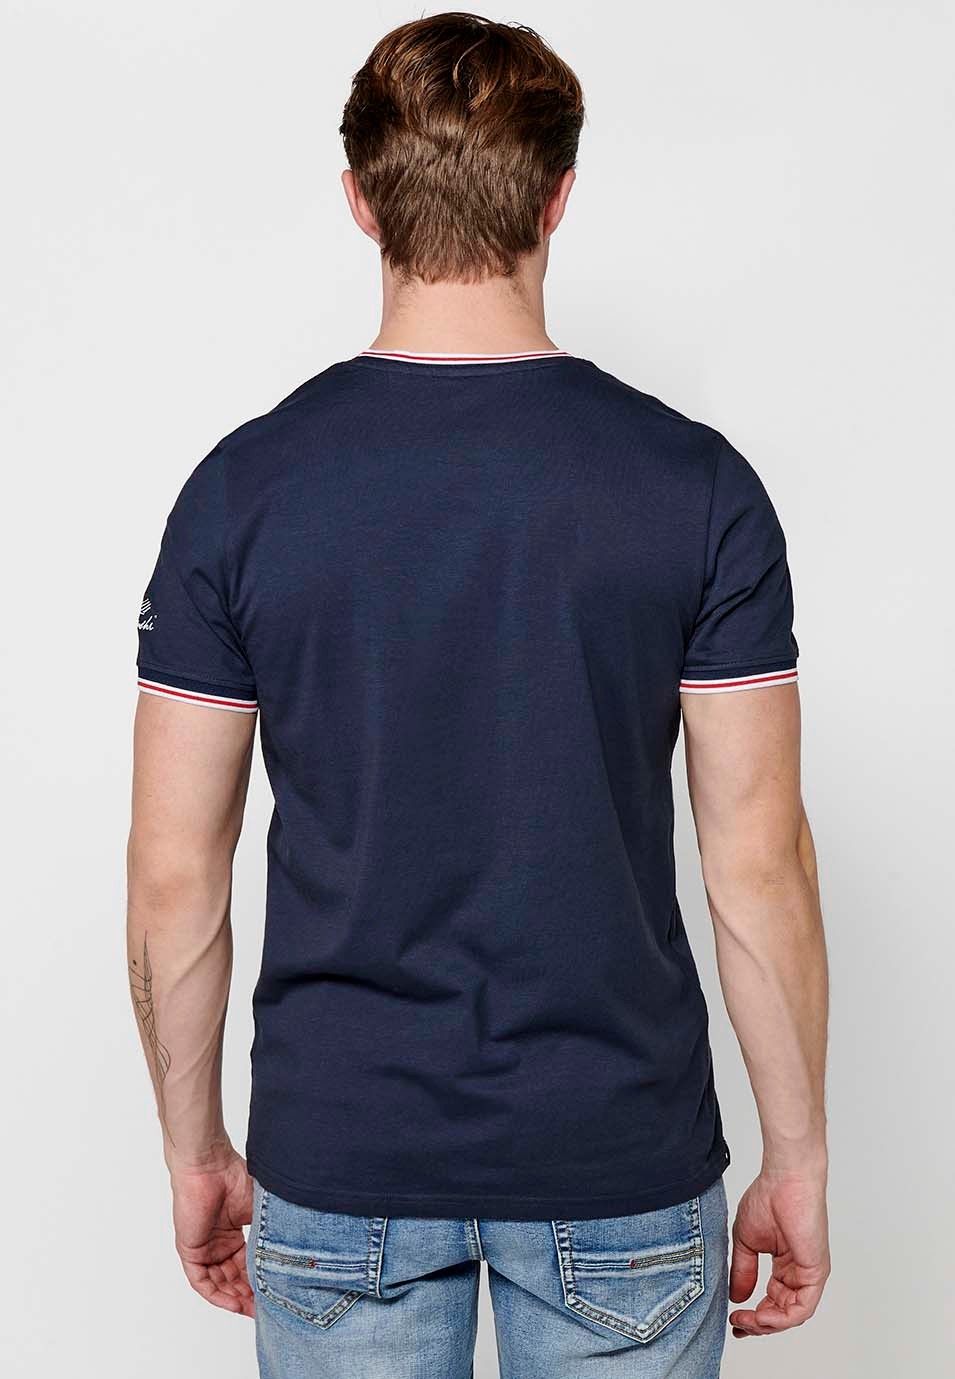 Short-sleeved V-neck T-shirt with navy buttons for men